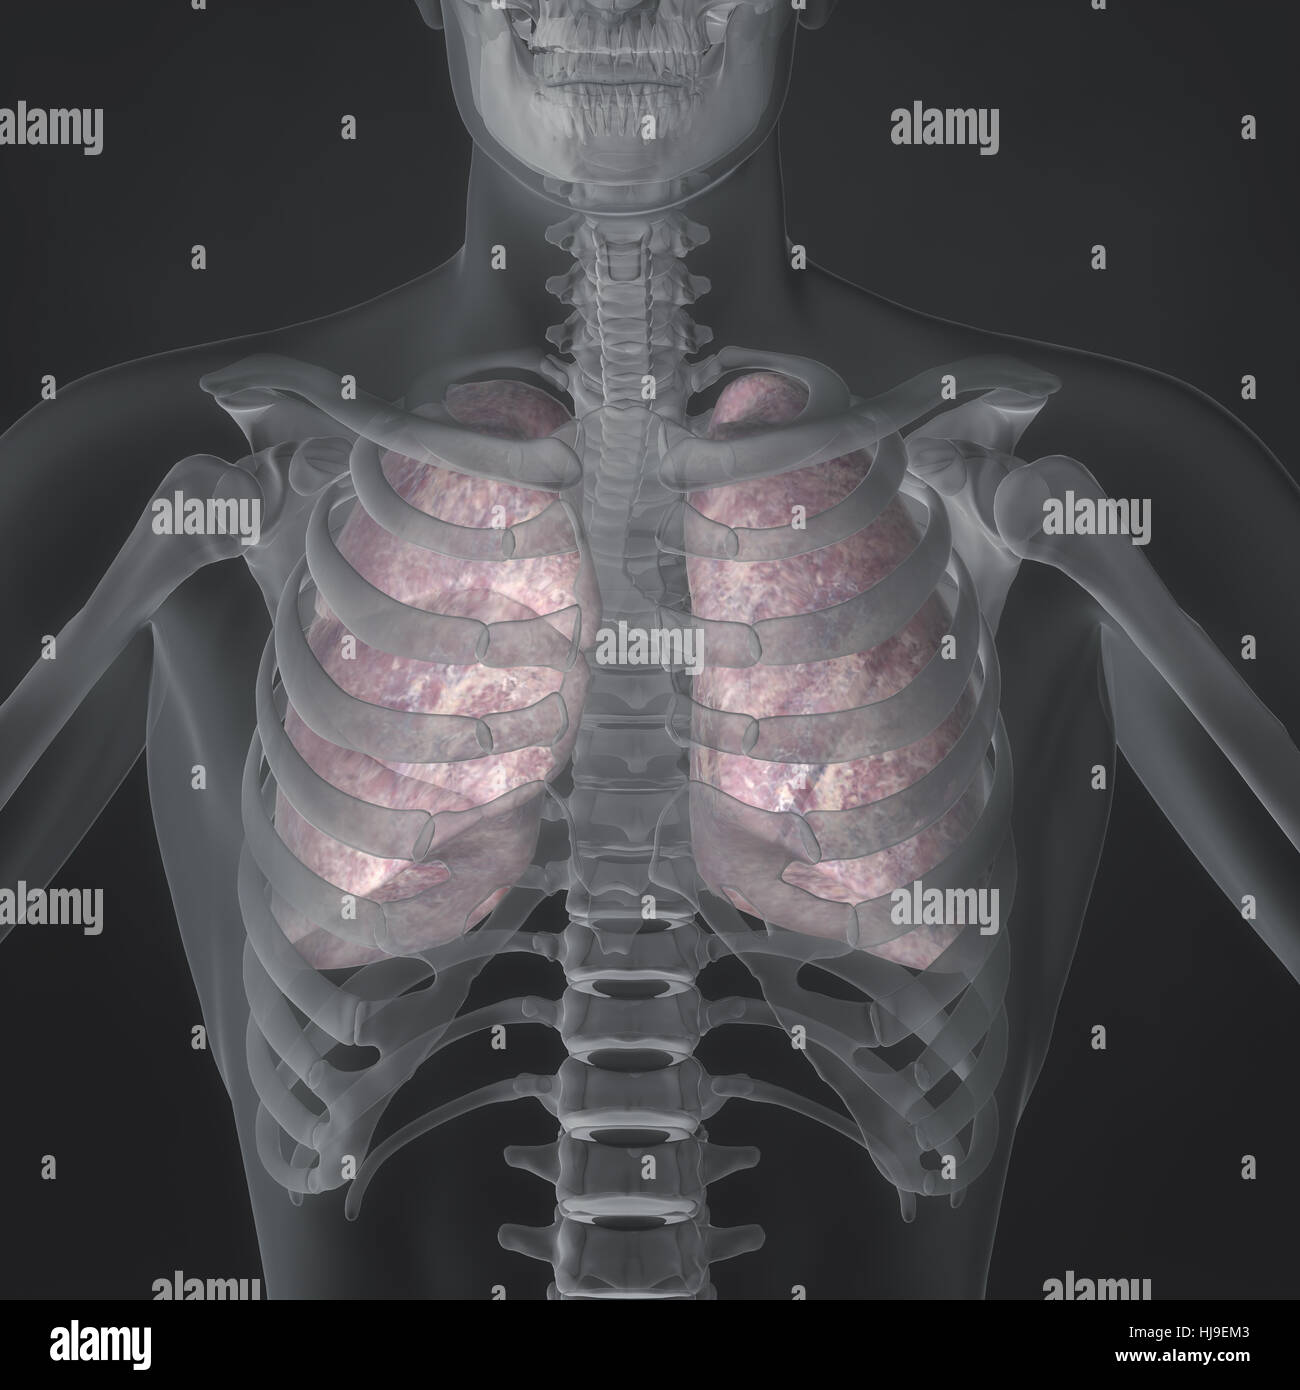 medicinally, medical, science, male, masculine, lungs, system, breath, anatomy, Stock Photo